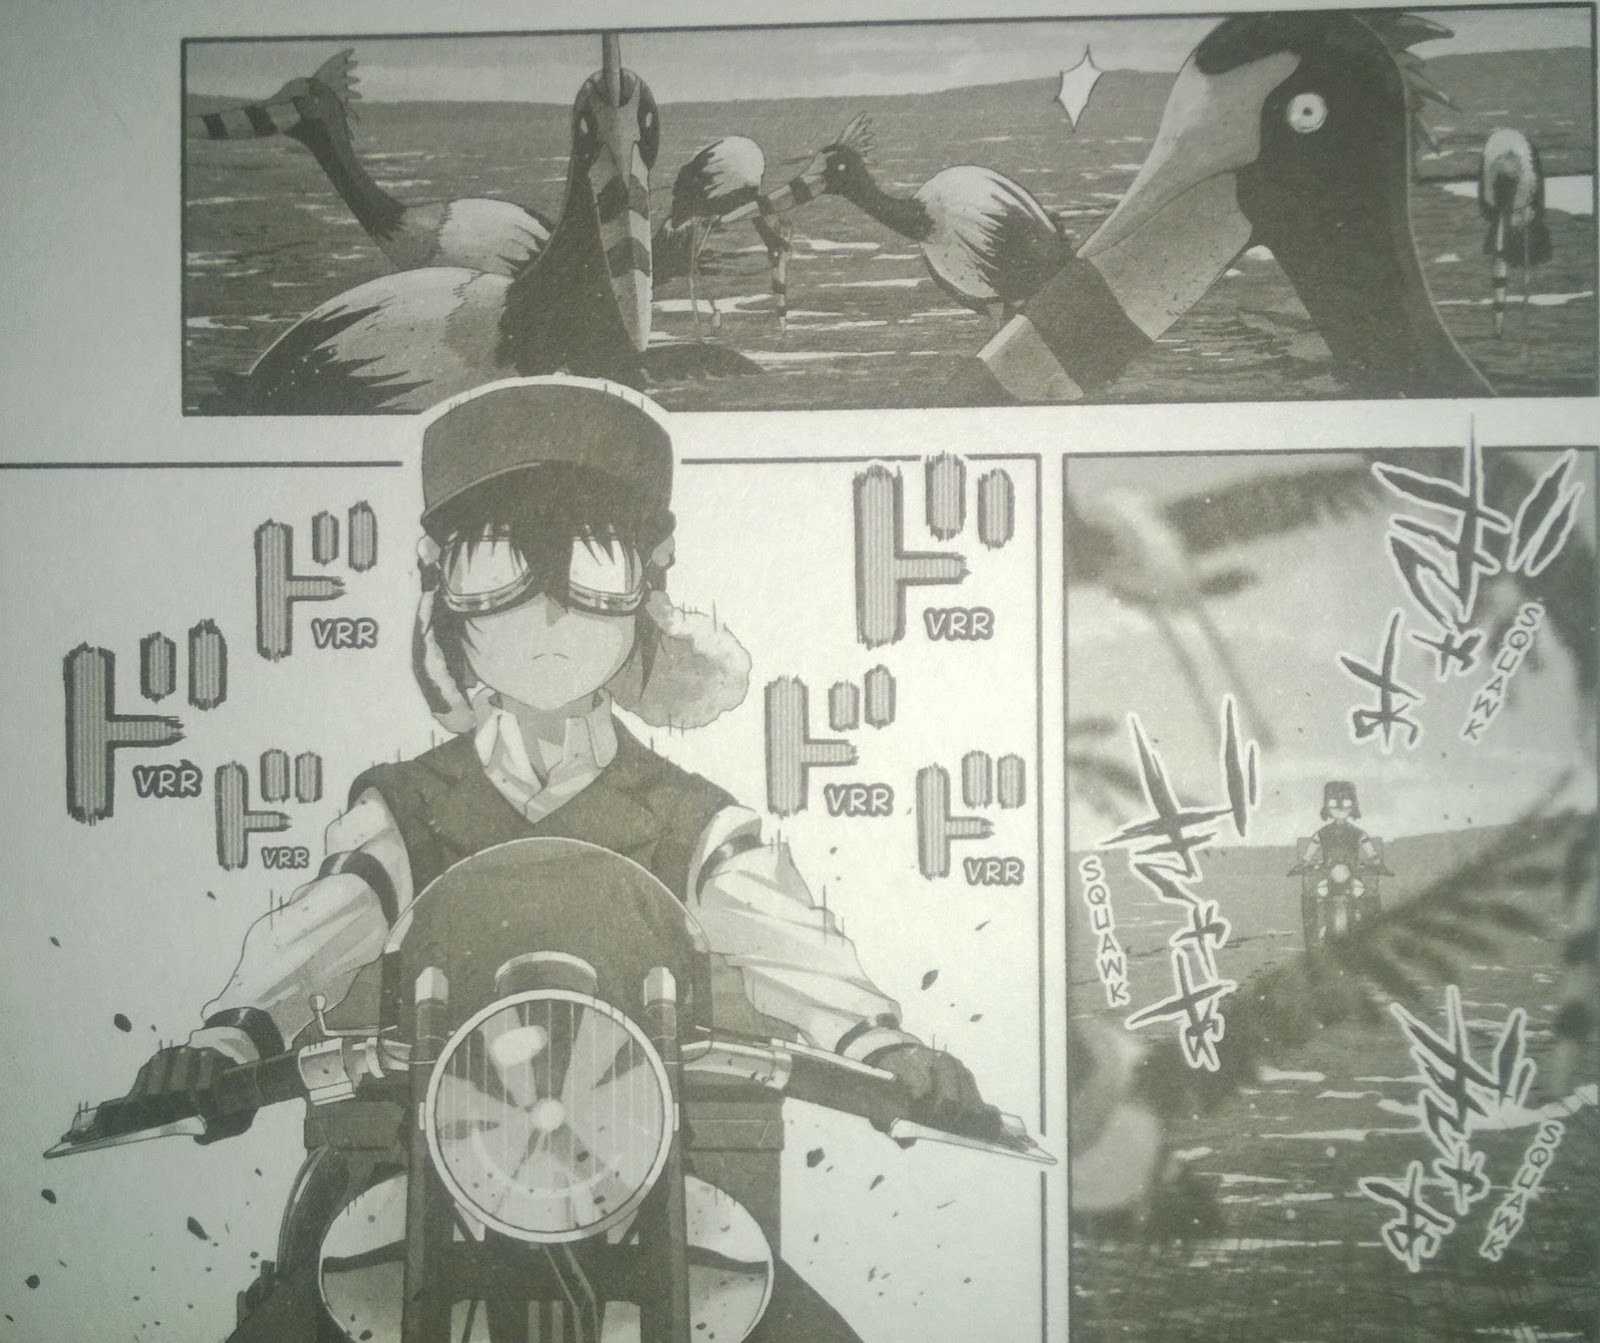 Page from Kino’s Journey. Kino drives through a flock of birds.